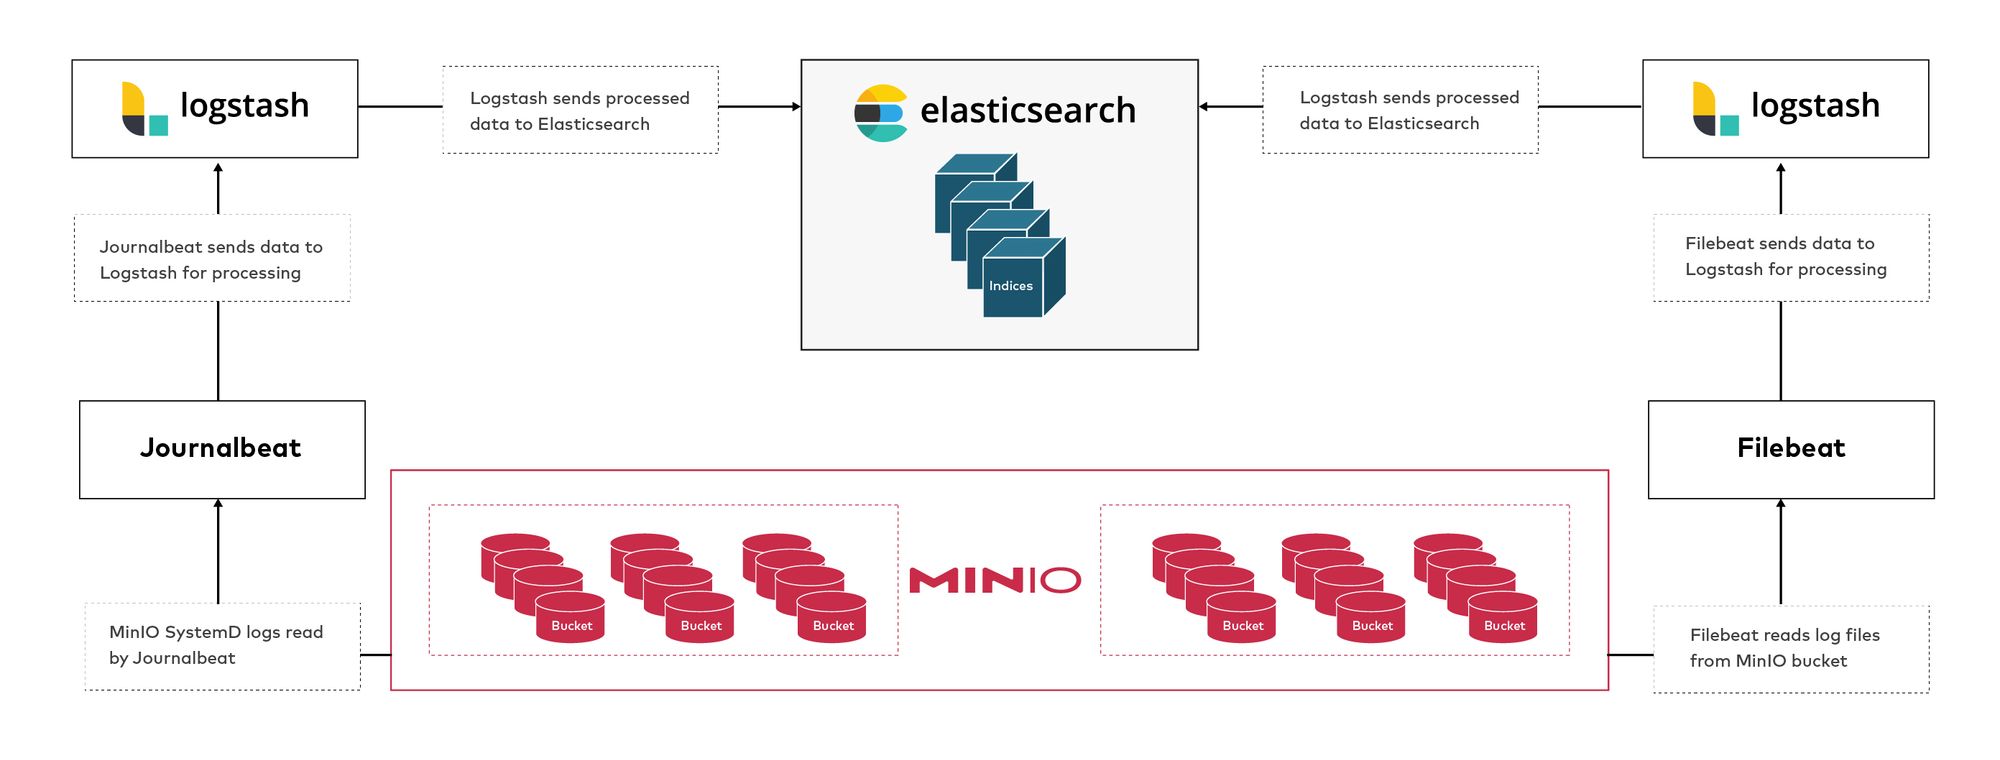 Godkendelse Formindske Næb Visualize usage patterns in MinIO using Elasticsearch and Beats